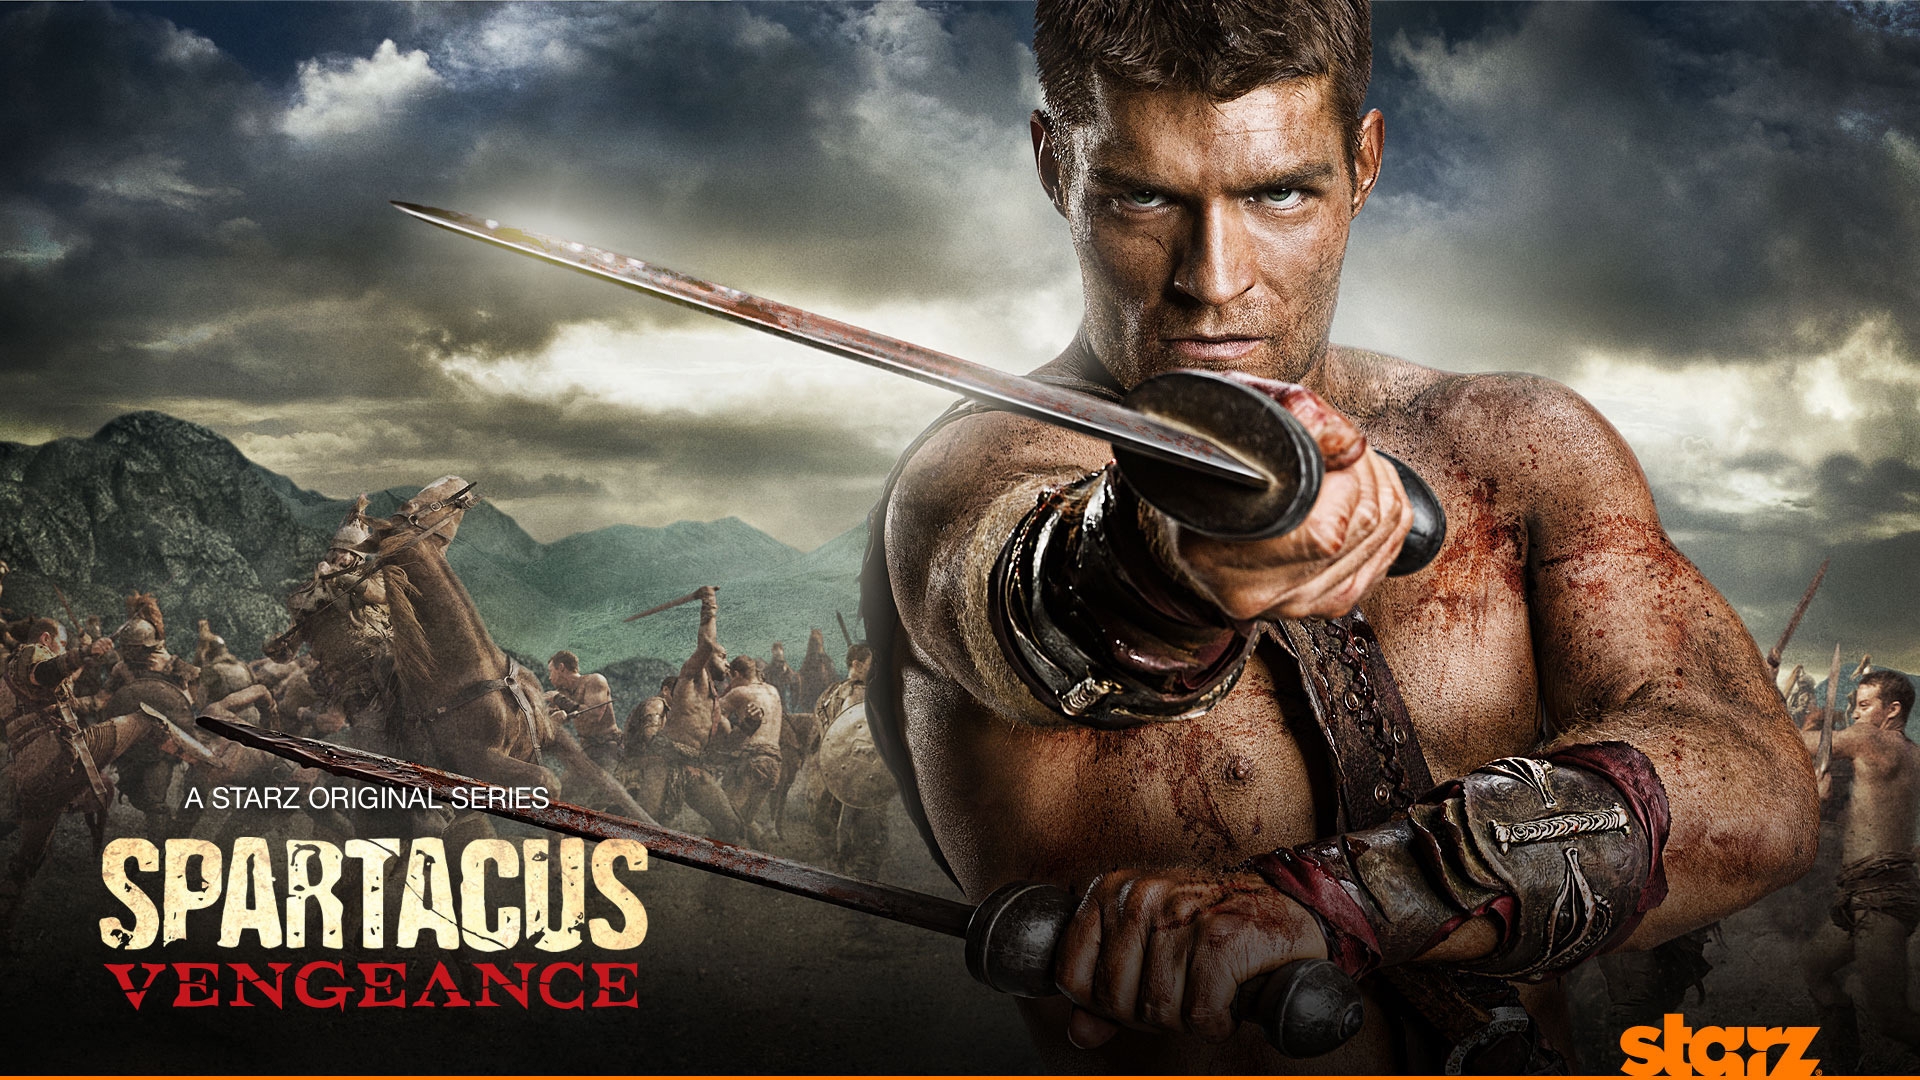 Tv Show Spartacus Vengeance for 1920 x 1080 HDTV 1080p resolution